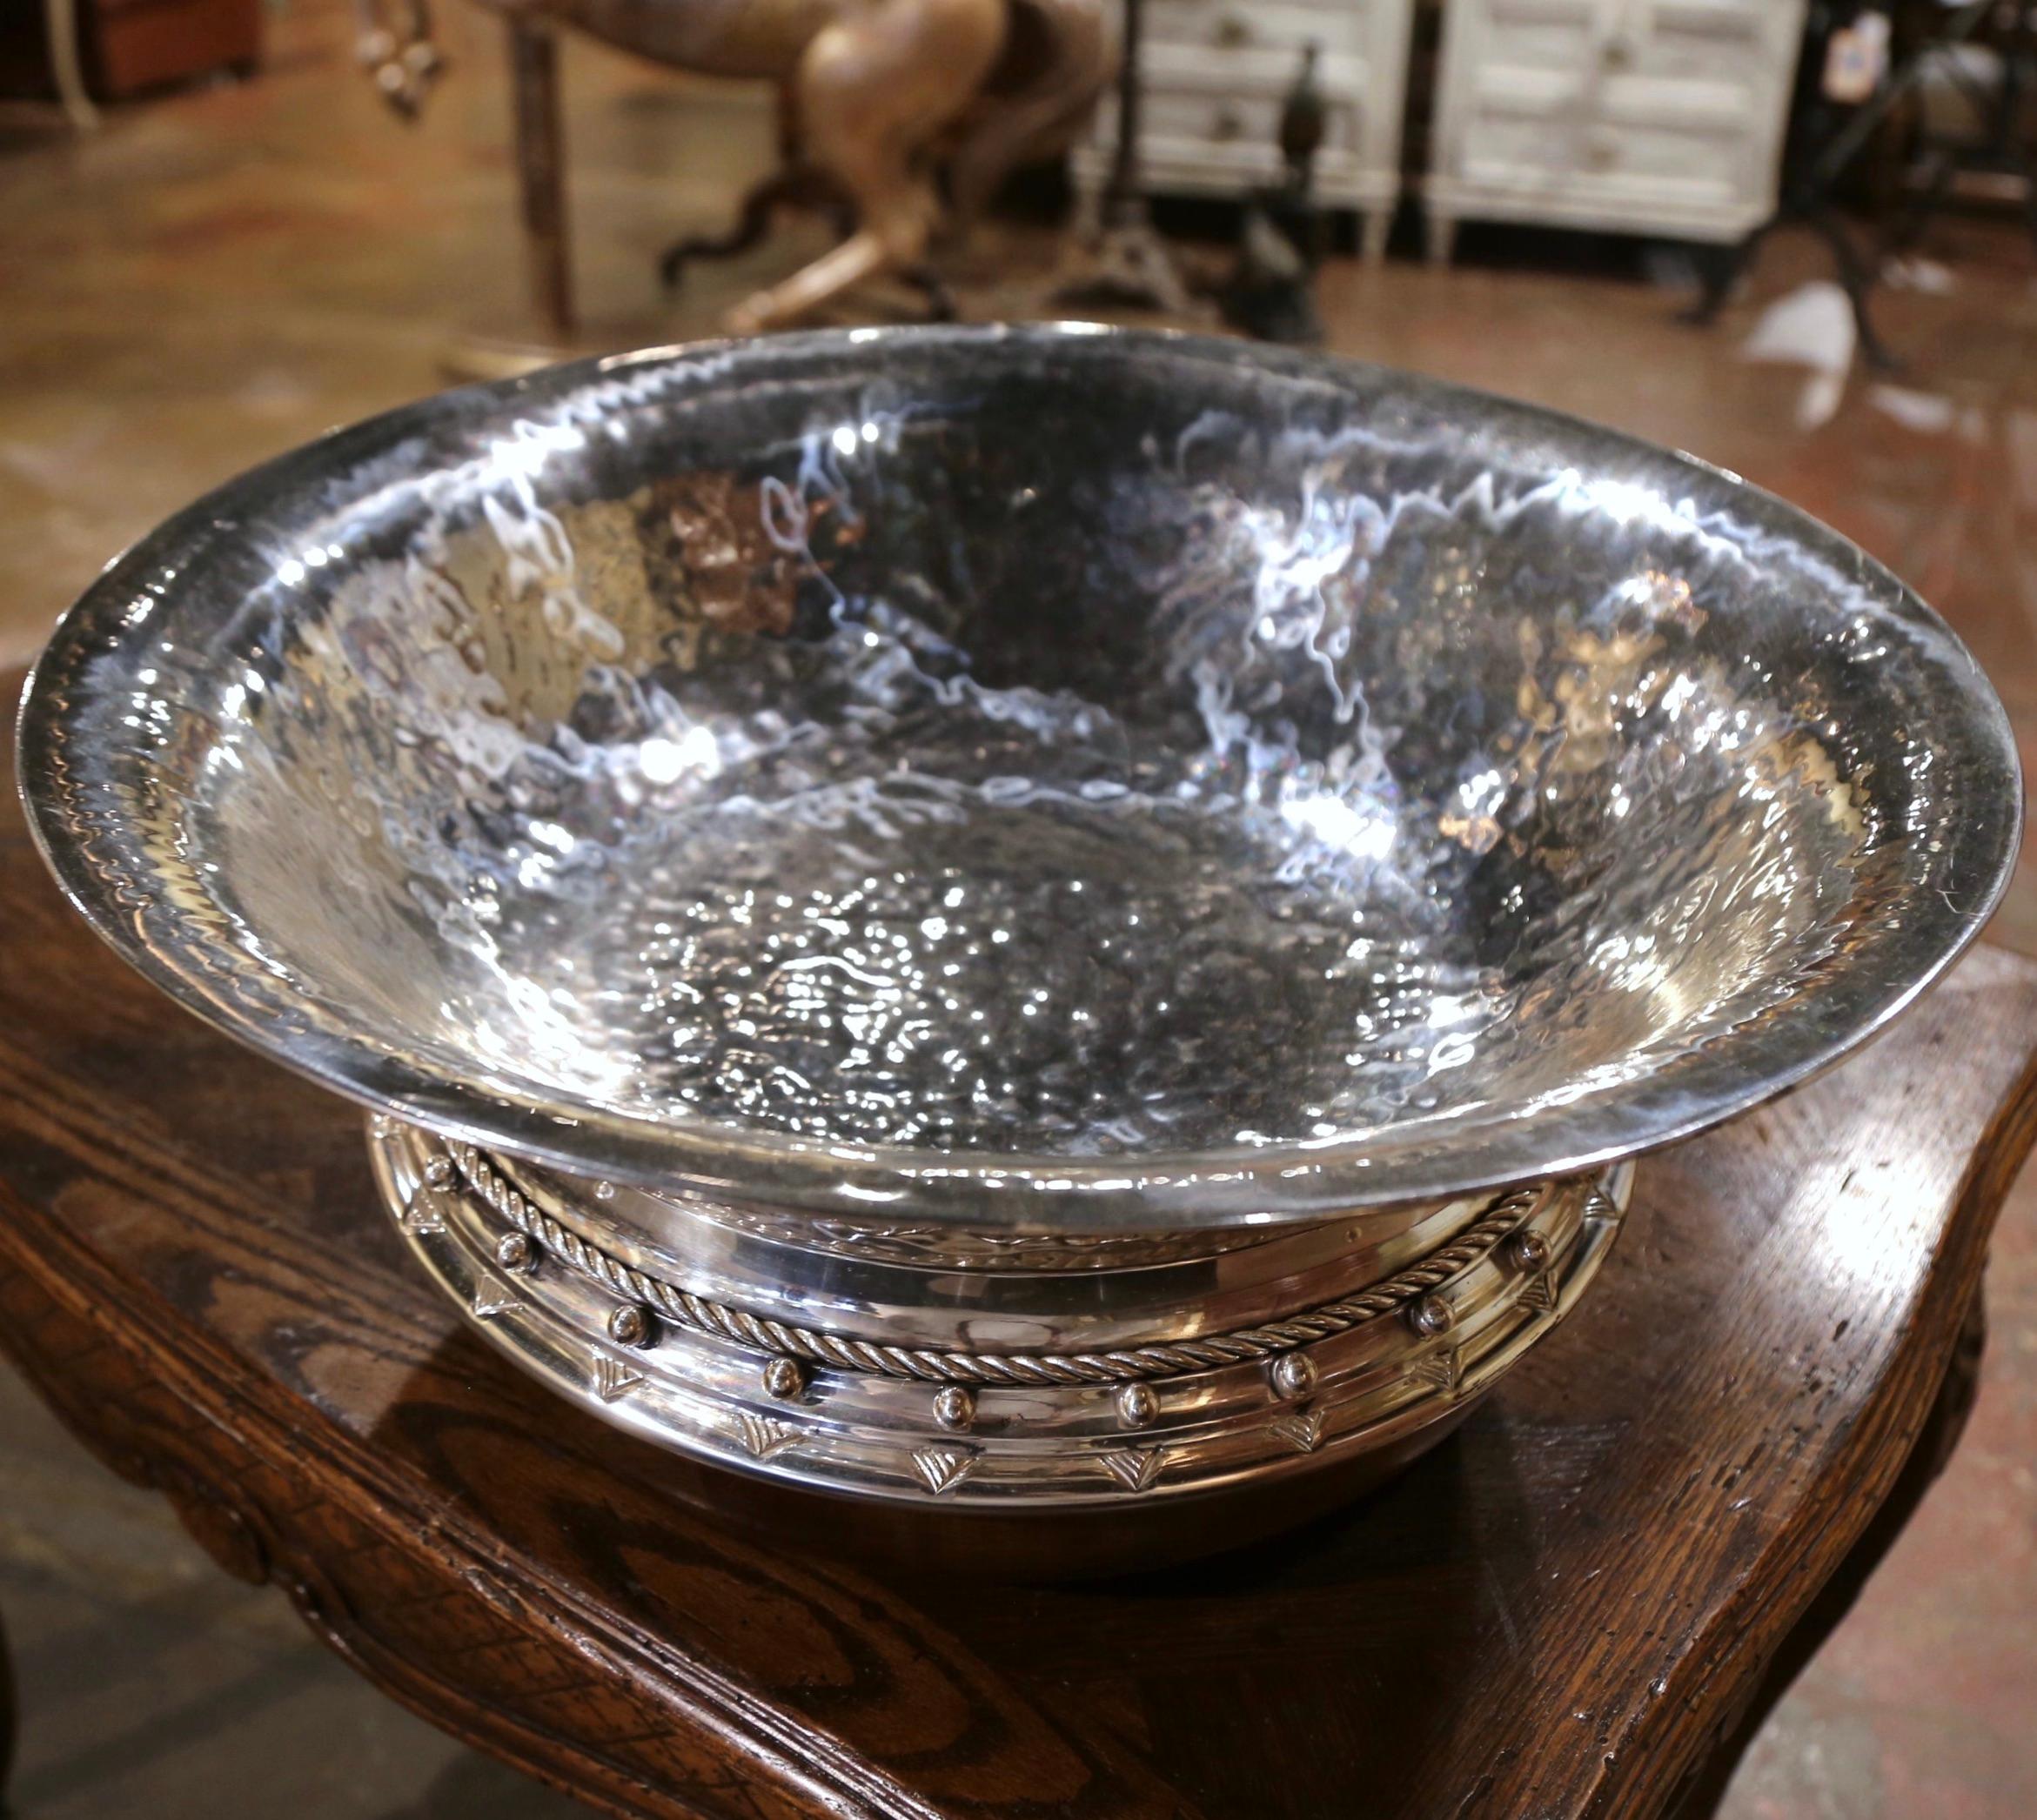 Crafted in Spain, circa 1970 and circular in shape, the handmade centerpiece features a hammered silver wide mouth bowl attached to a hand carved walnut base. The large bowl is decorated with rope details and features circular studs throughout the